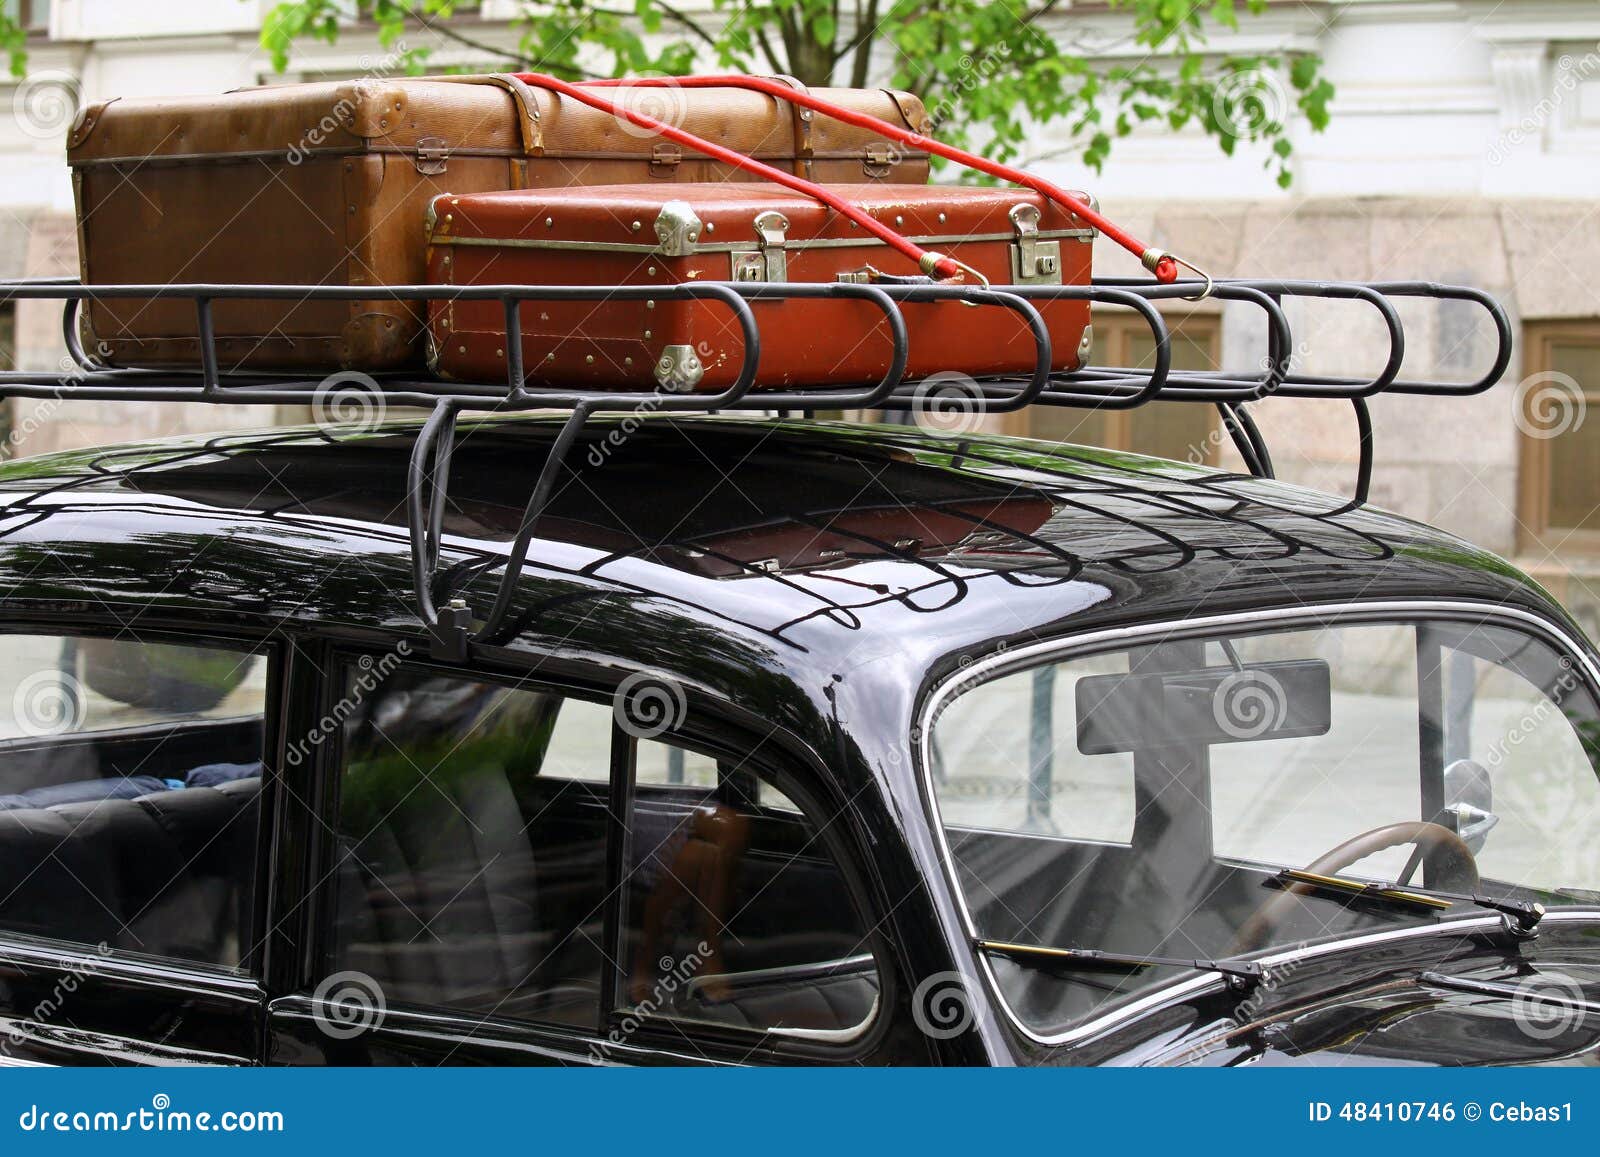 Vintage suitcases on the car roof. Vintage leather suitcases packed on top of the old car roof